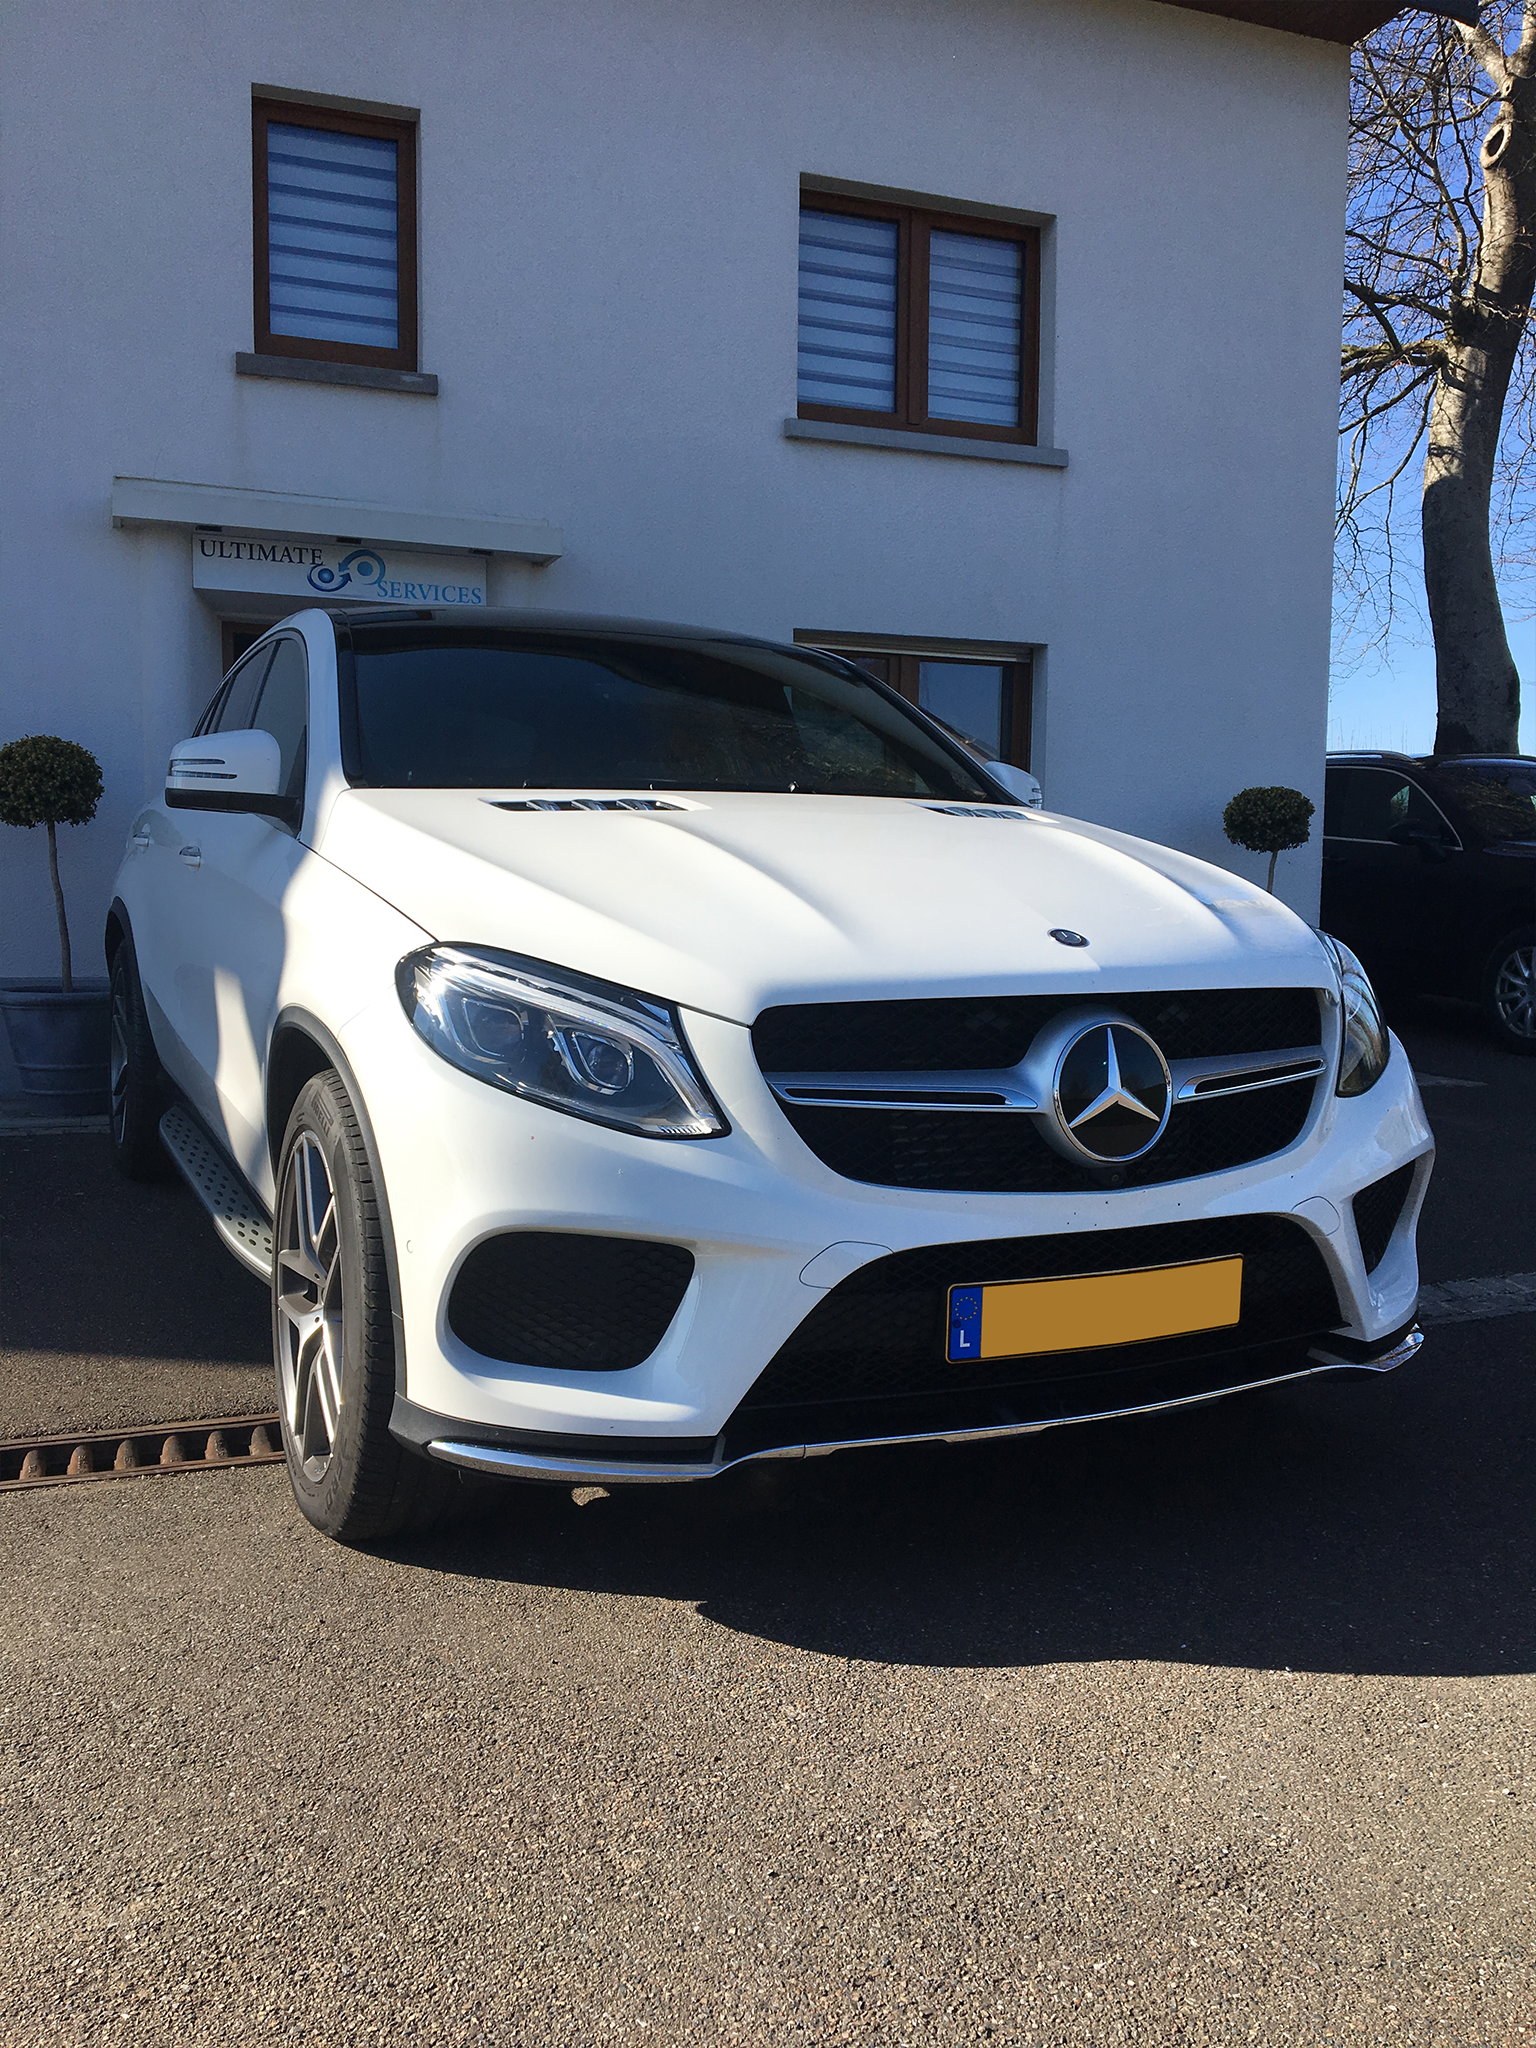 Luxembourg Location Mercedes Ultimate Services